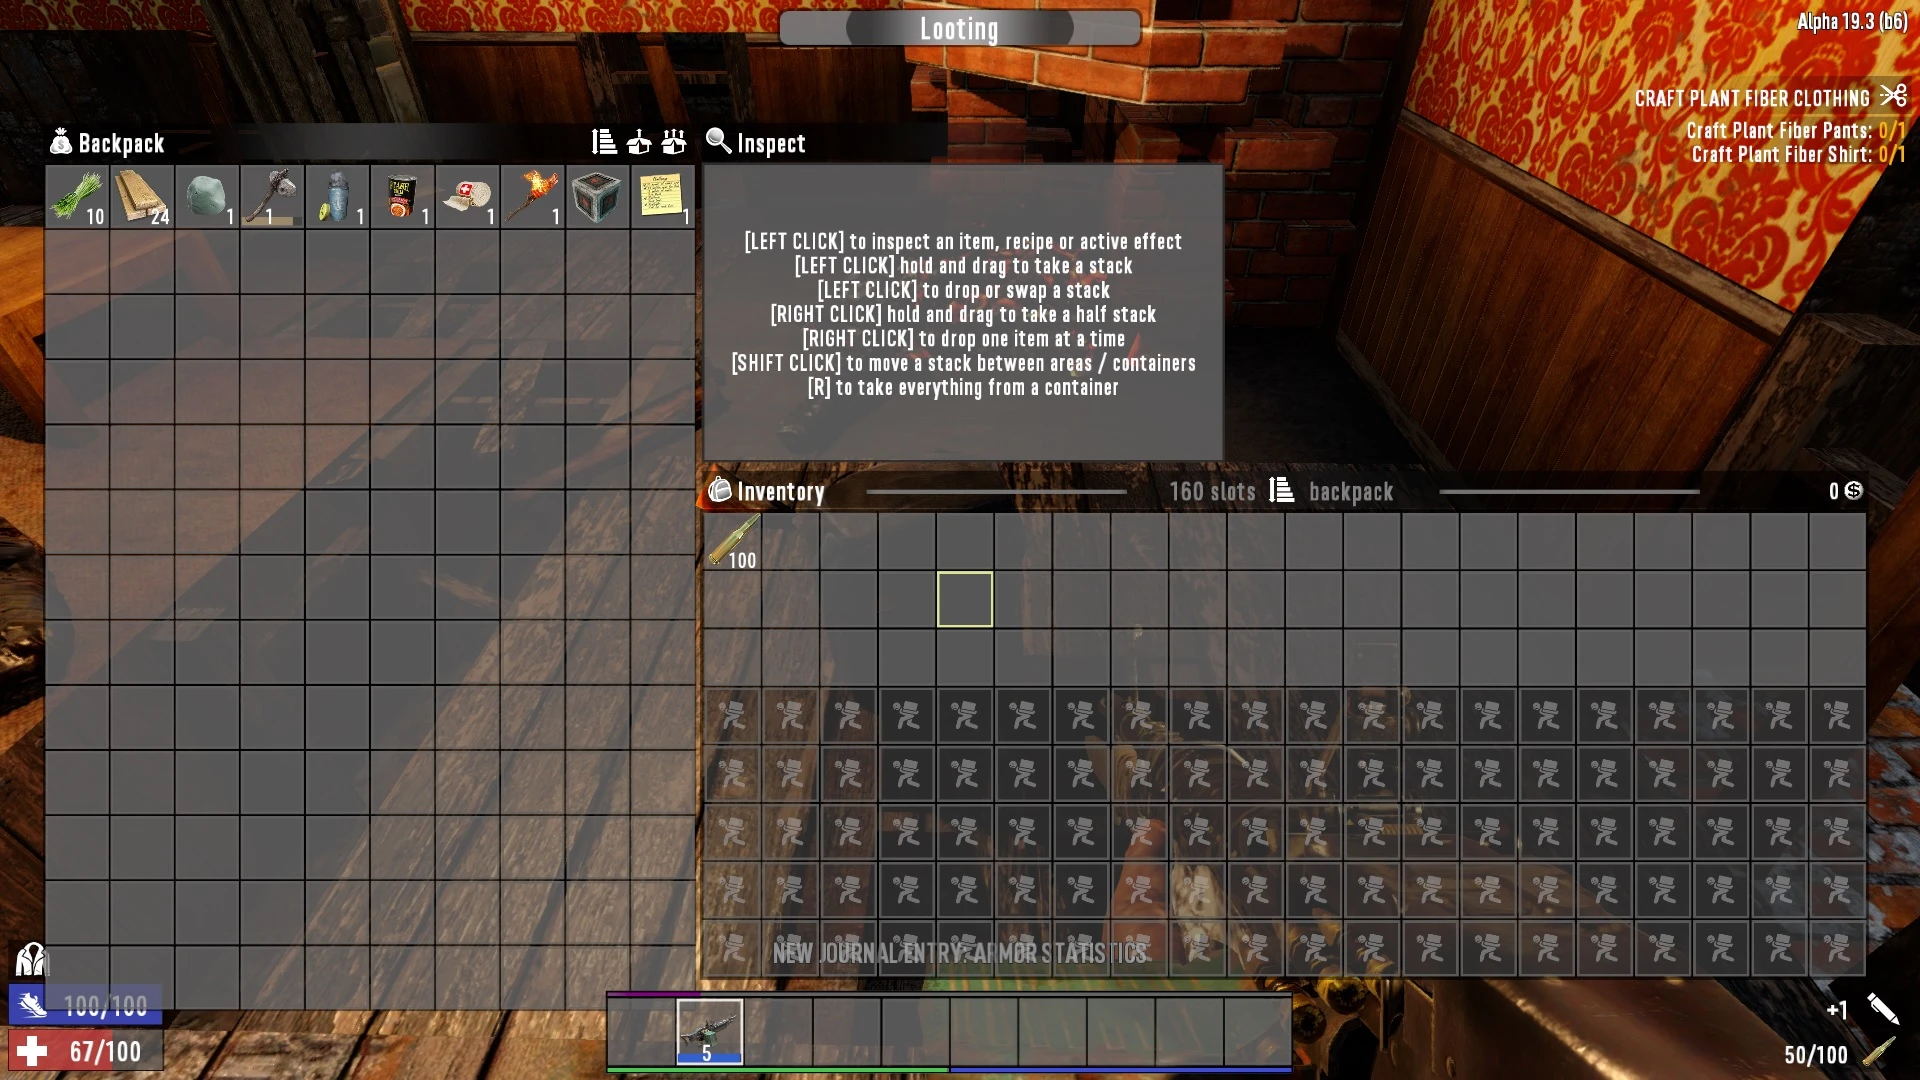 7 days to die zombie drop bag chance